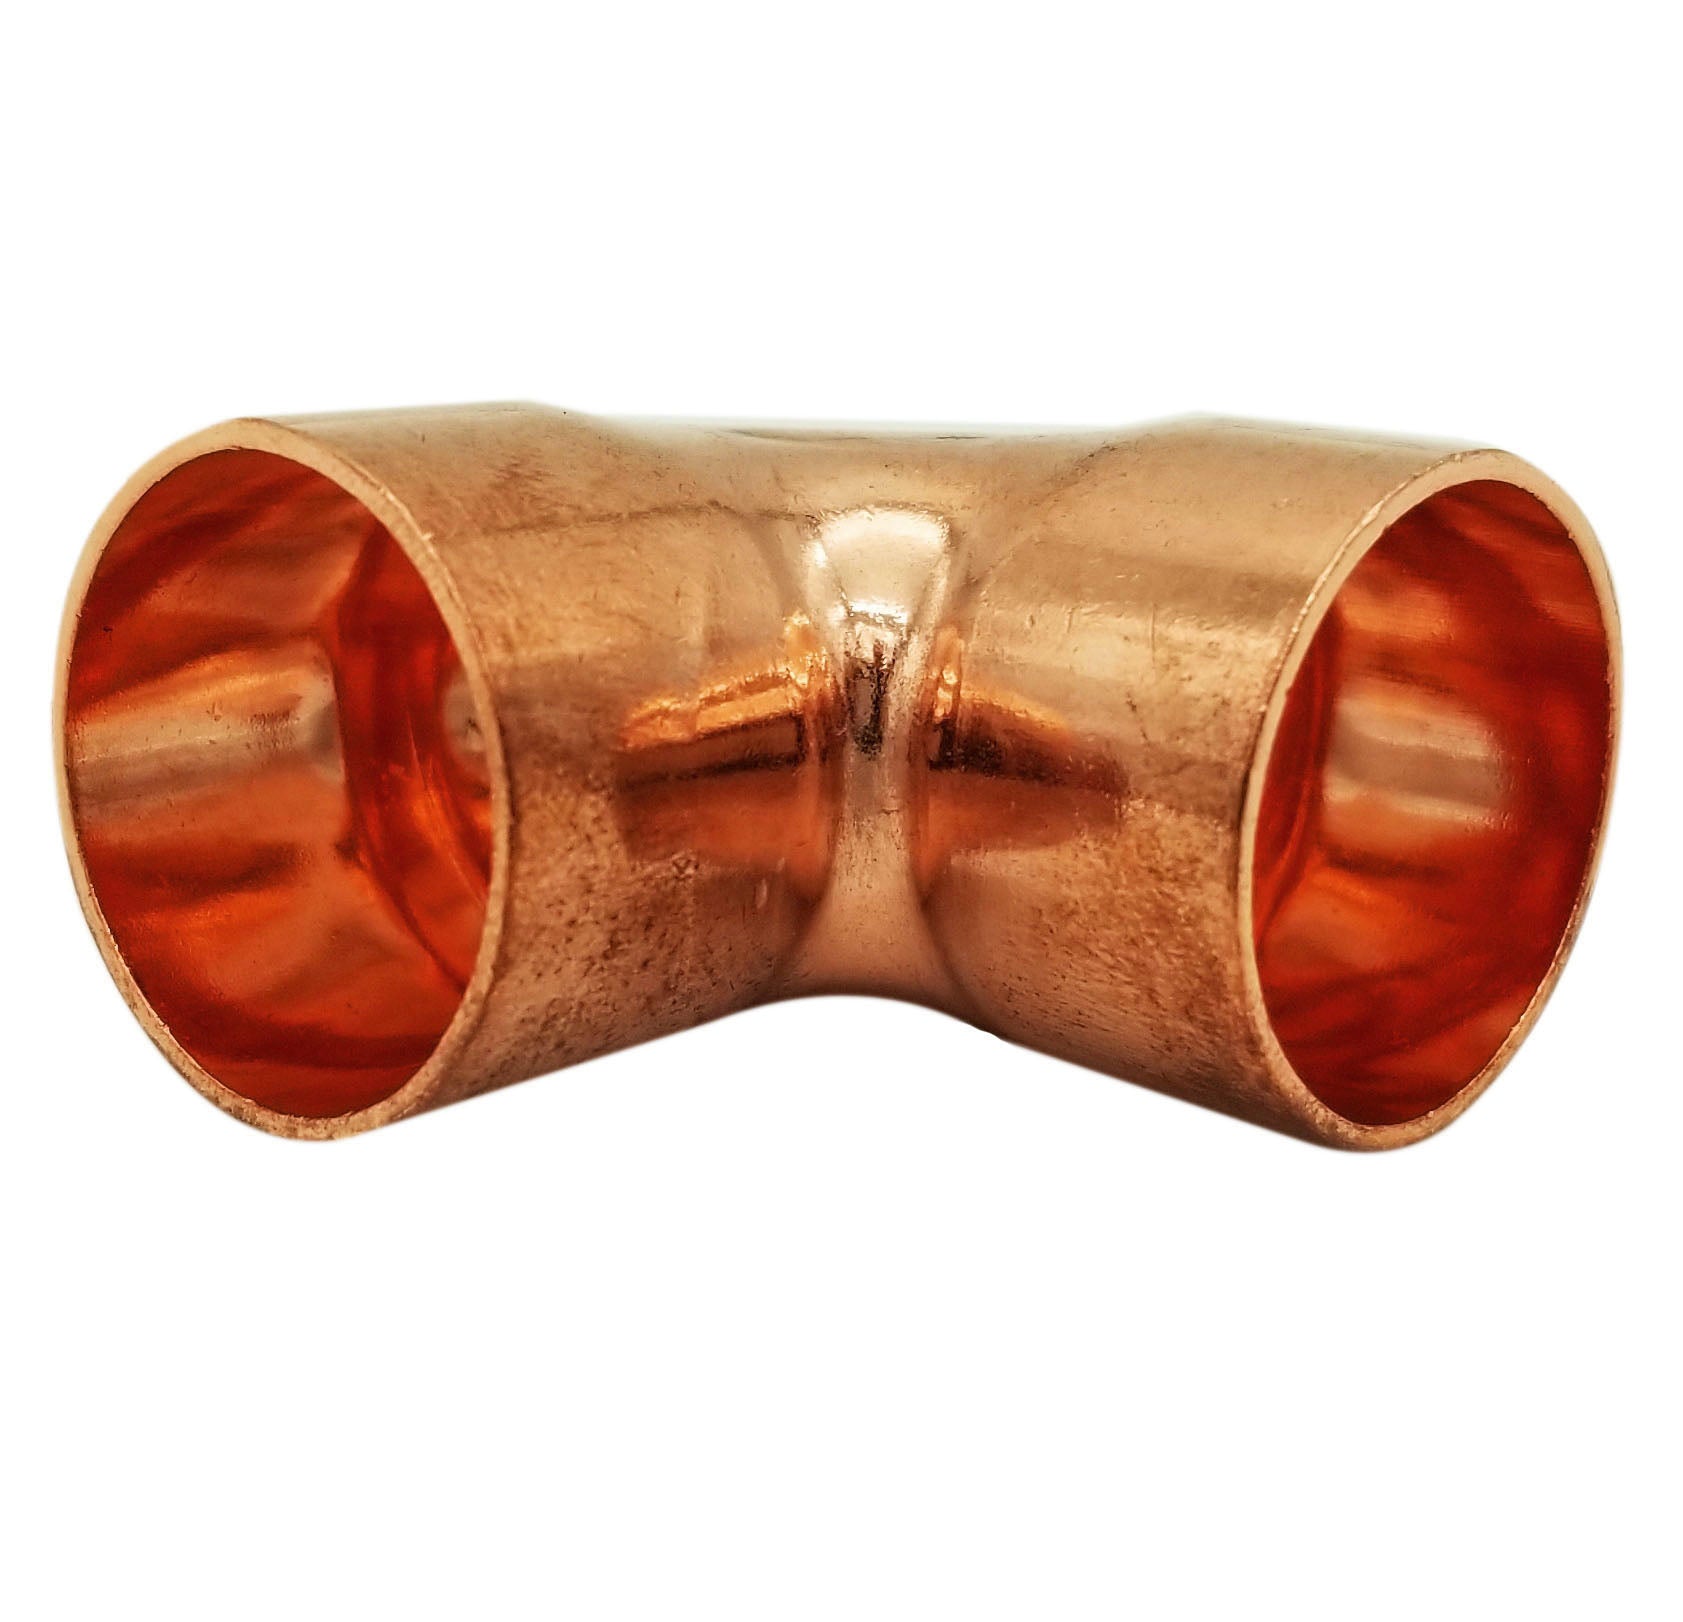 Copper Fitting 1-1/8 Inch (HVAC Outer Dimension) 1 Inch (Plumbing Inner Dimension) - 45 Degree Copper Pressure Elbow & HVAC – 99.9% Pure Copper - 10 Pack